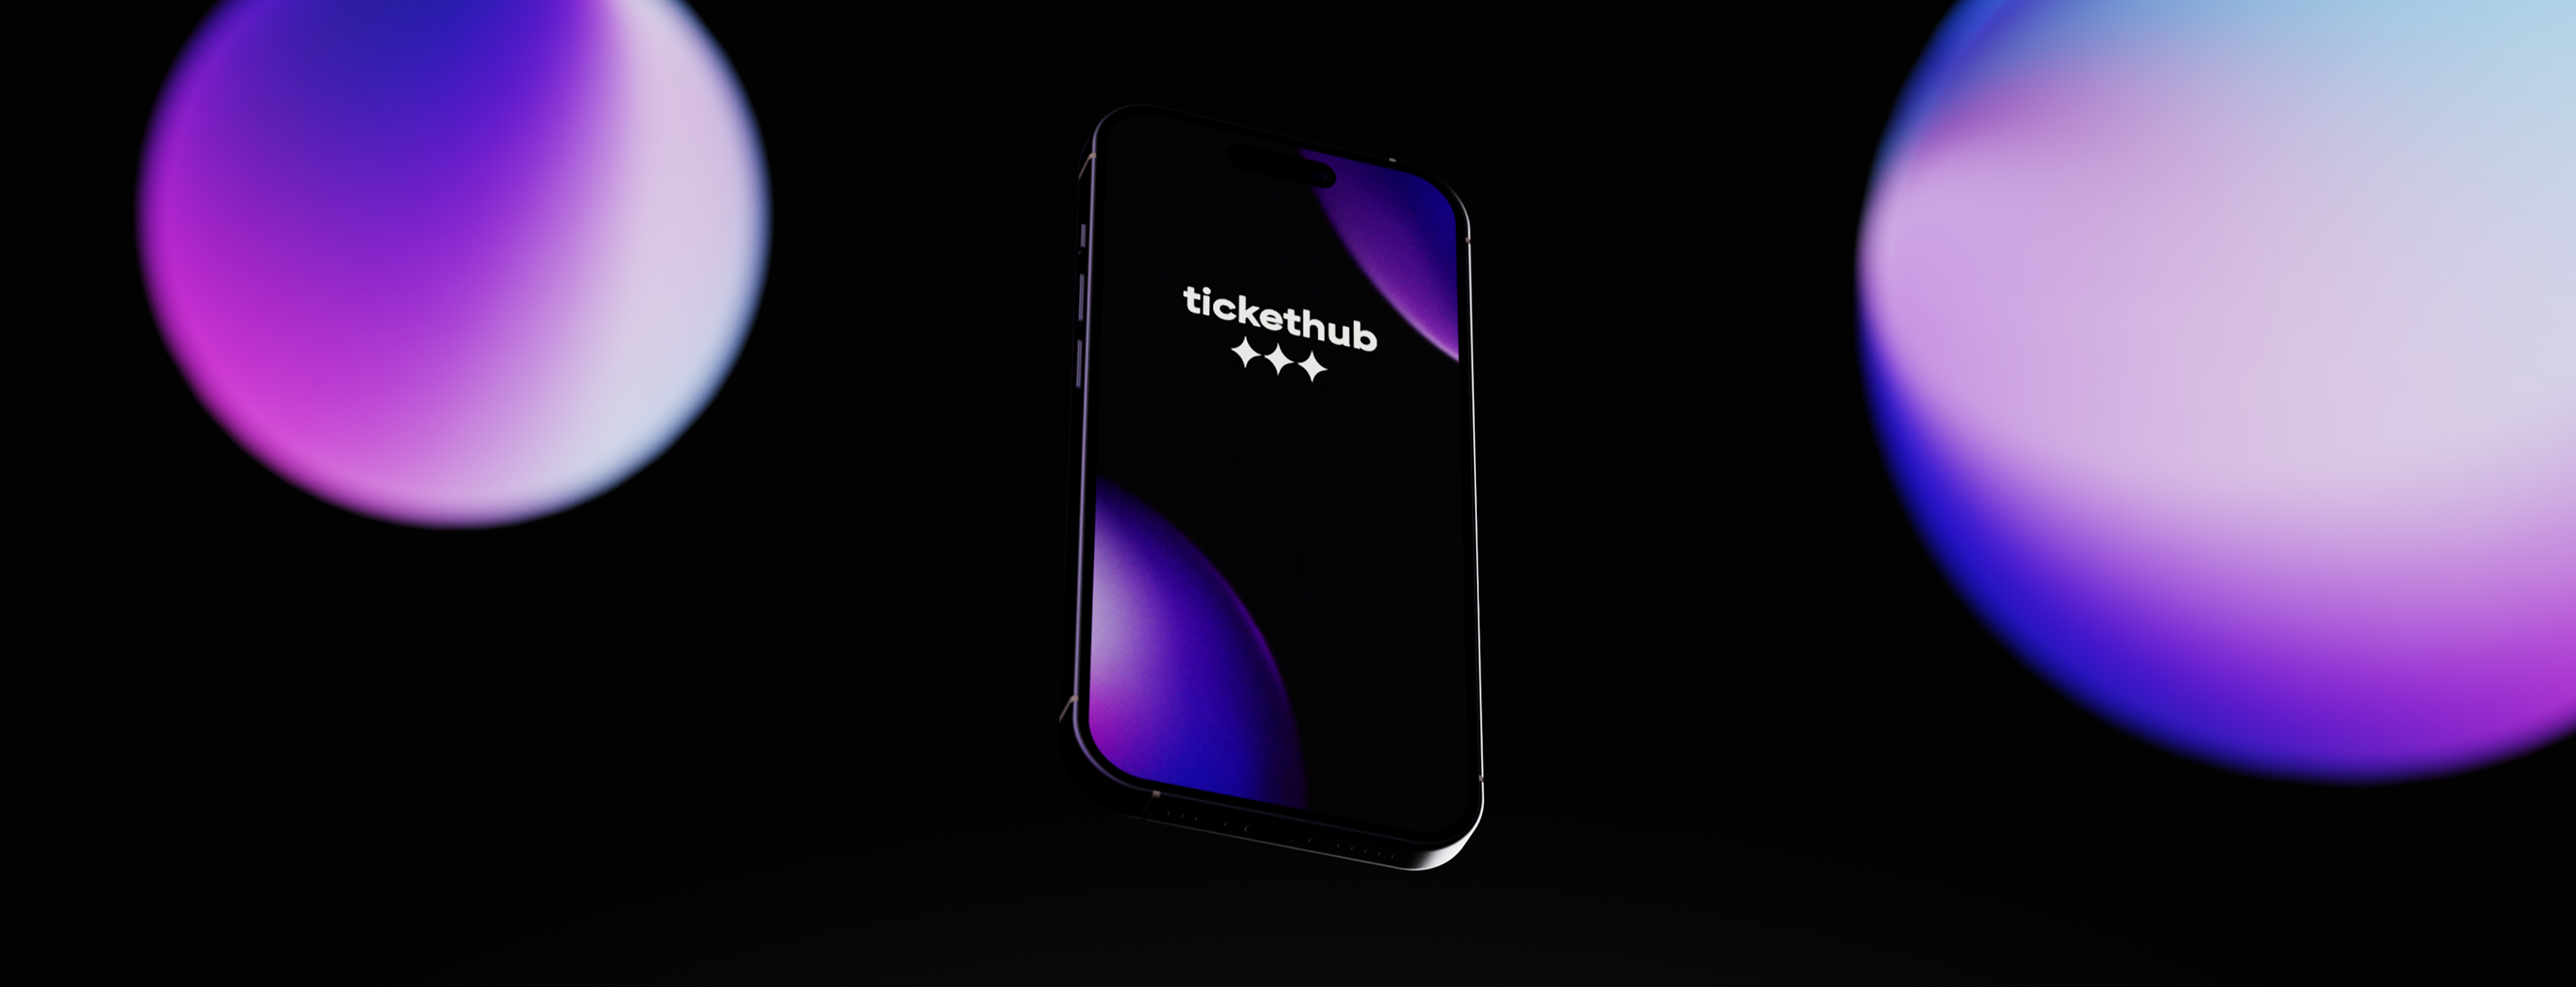 Protected: tickethub